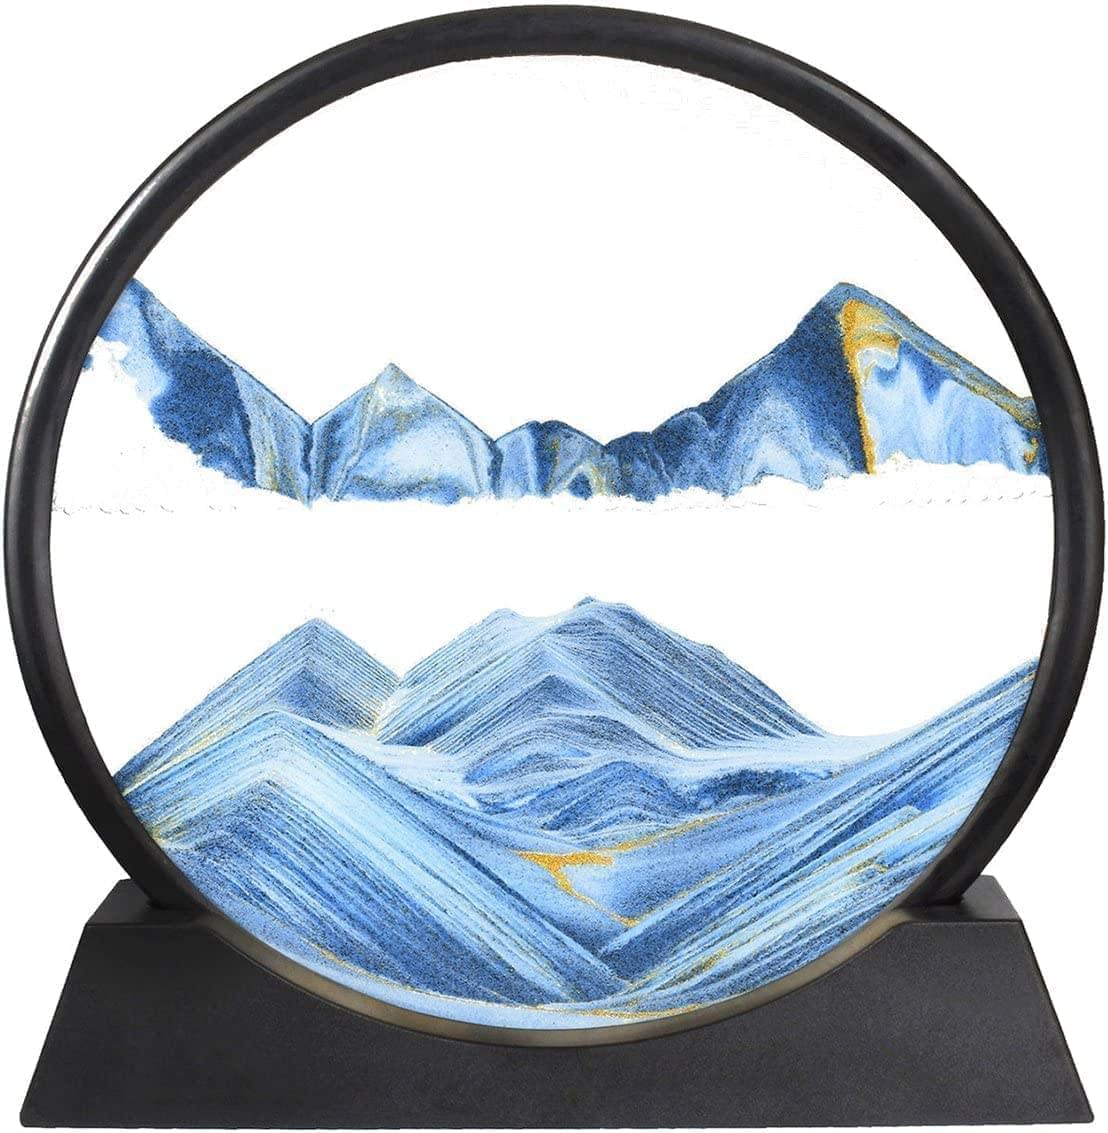 12" Inches 3D Round Glass Moving Flowing Sand Art Display Sandscape Motion Xmas Gift